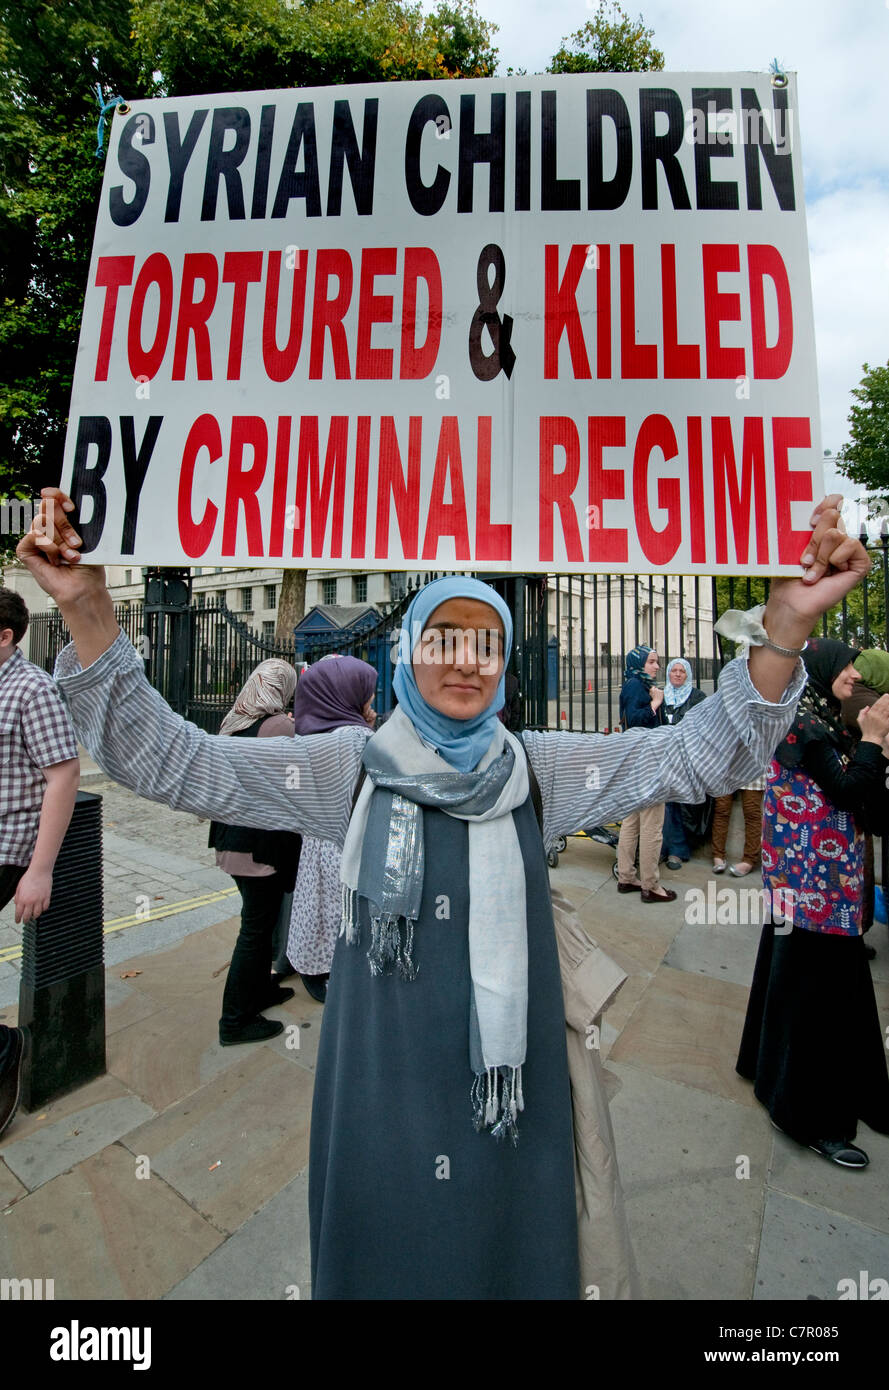 Syrians protesting for regime change at Downing Street Central London September 2011 Stock Photo